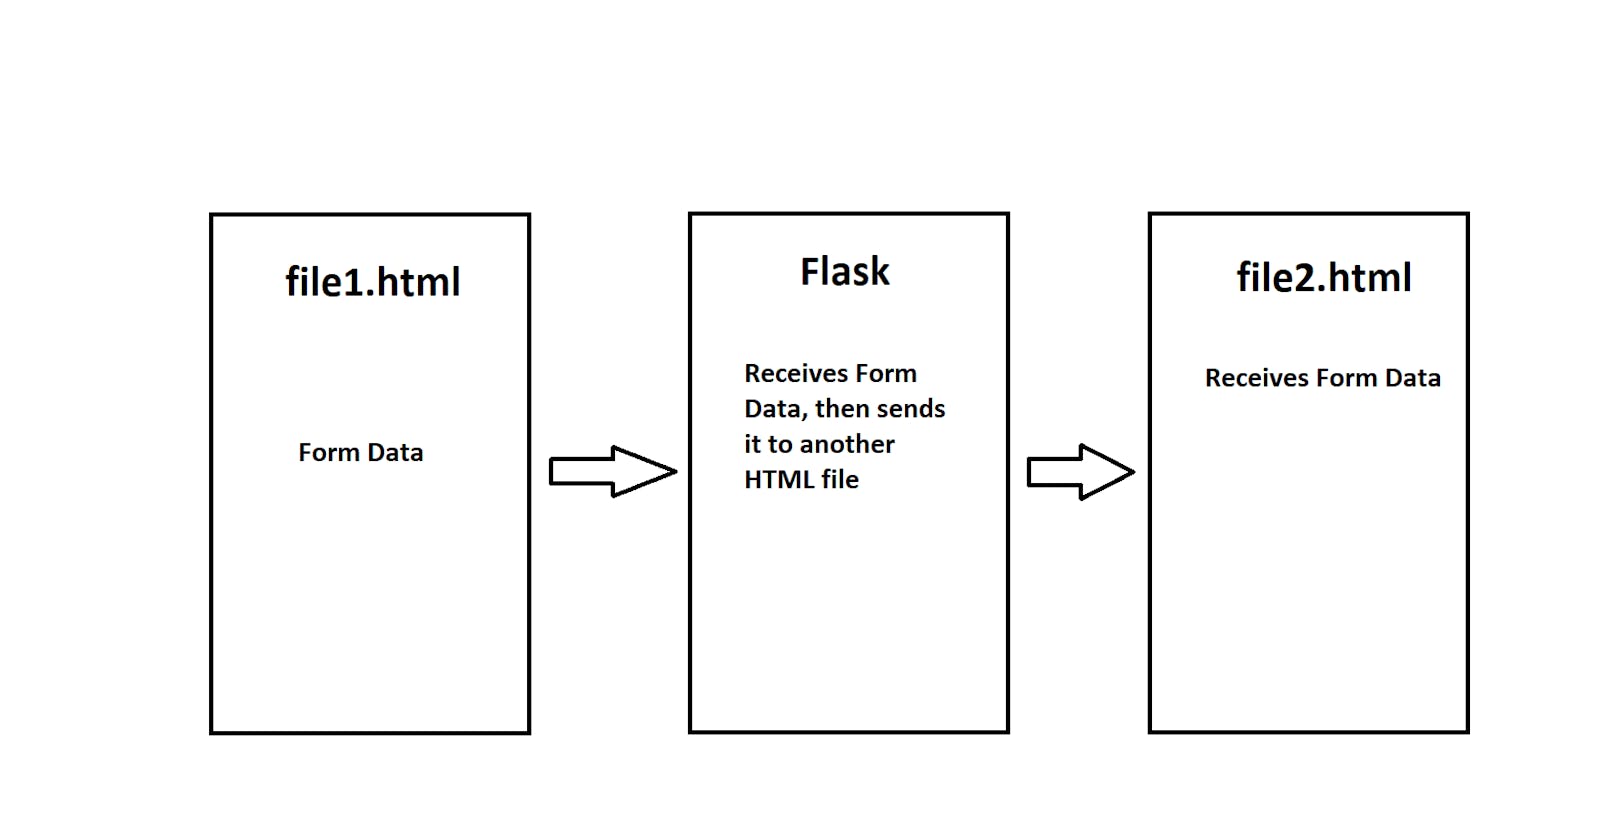 How to send HTML Form Data to Python's Microframework Flask